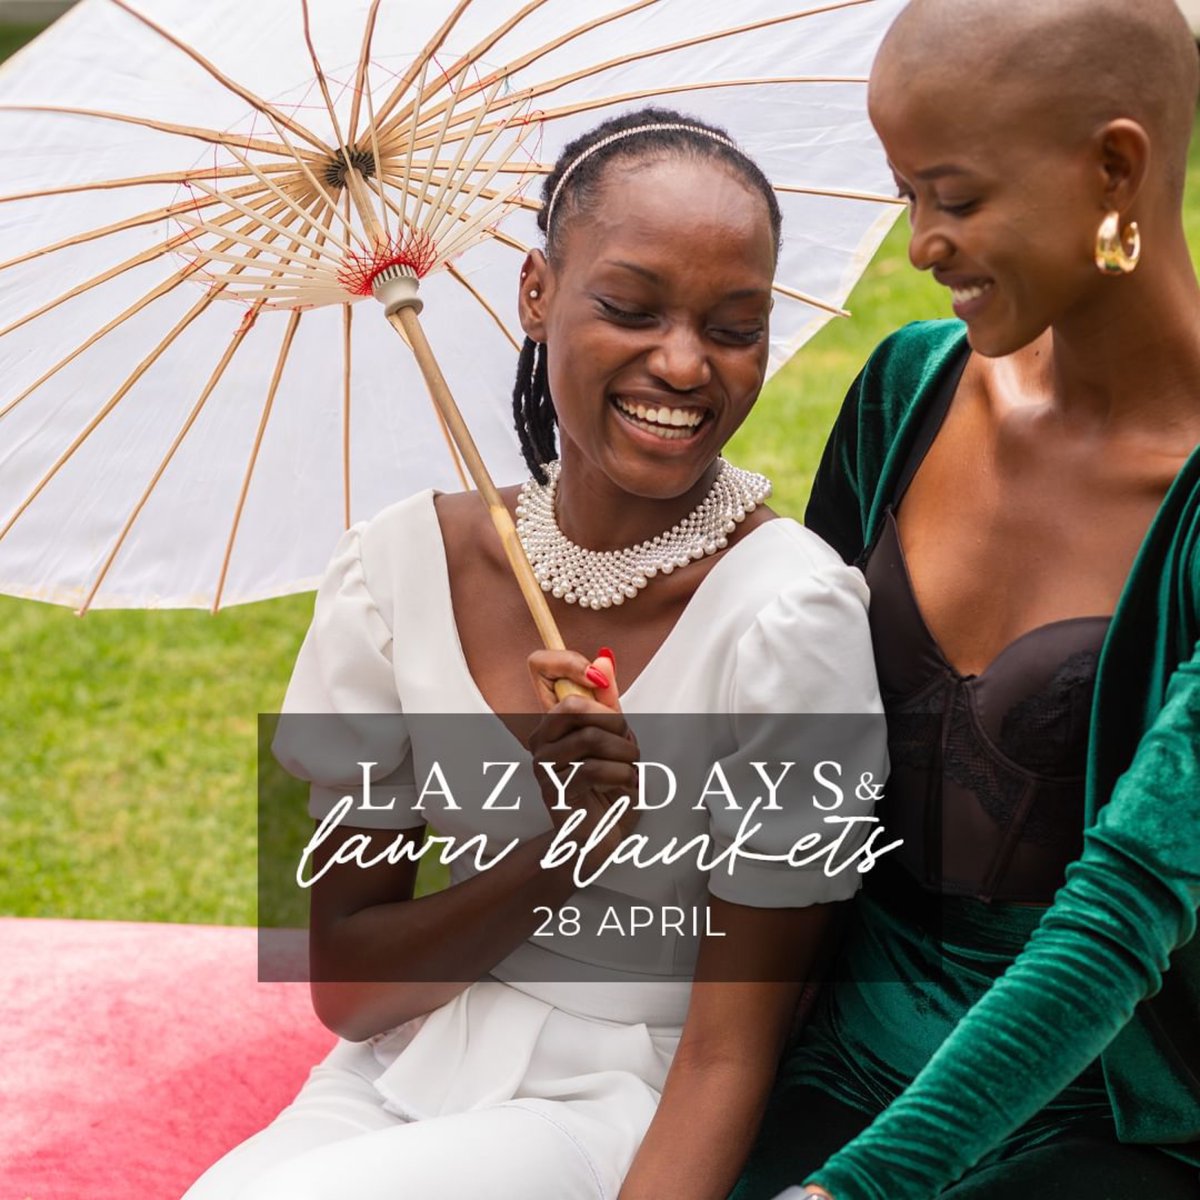 Experience the epitome of leisure & luxury at Fairlawns Boutique Hotel's exclusive picnic event, where lazy days and lawn blankets meet enchanting live music by Jacques Lagesse! Sunday, 28 April 12:00 to 4:00pm - Sandton🍾🍽️🇿🇦 restaurants.co.za/amuse-bouche